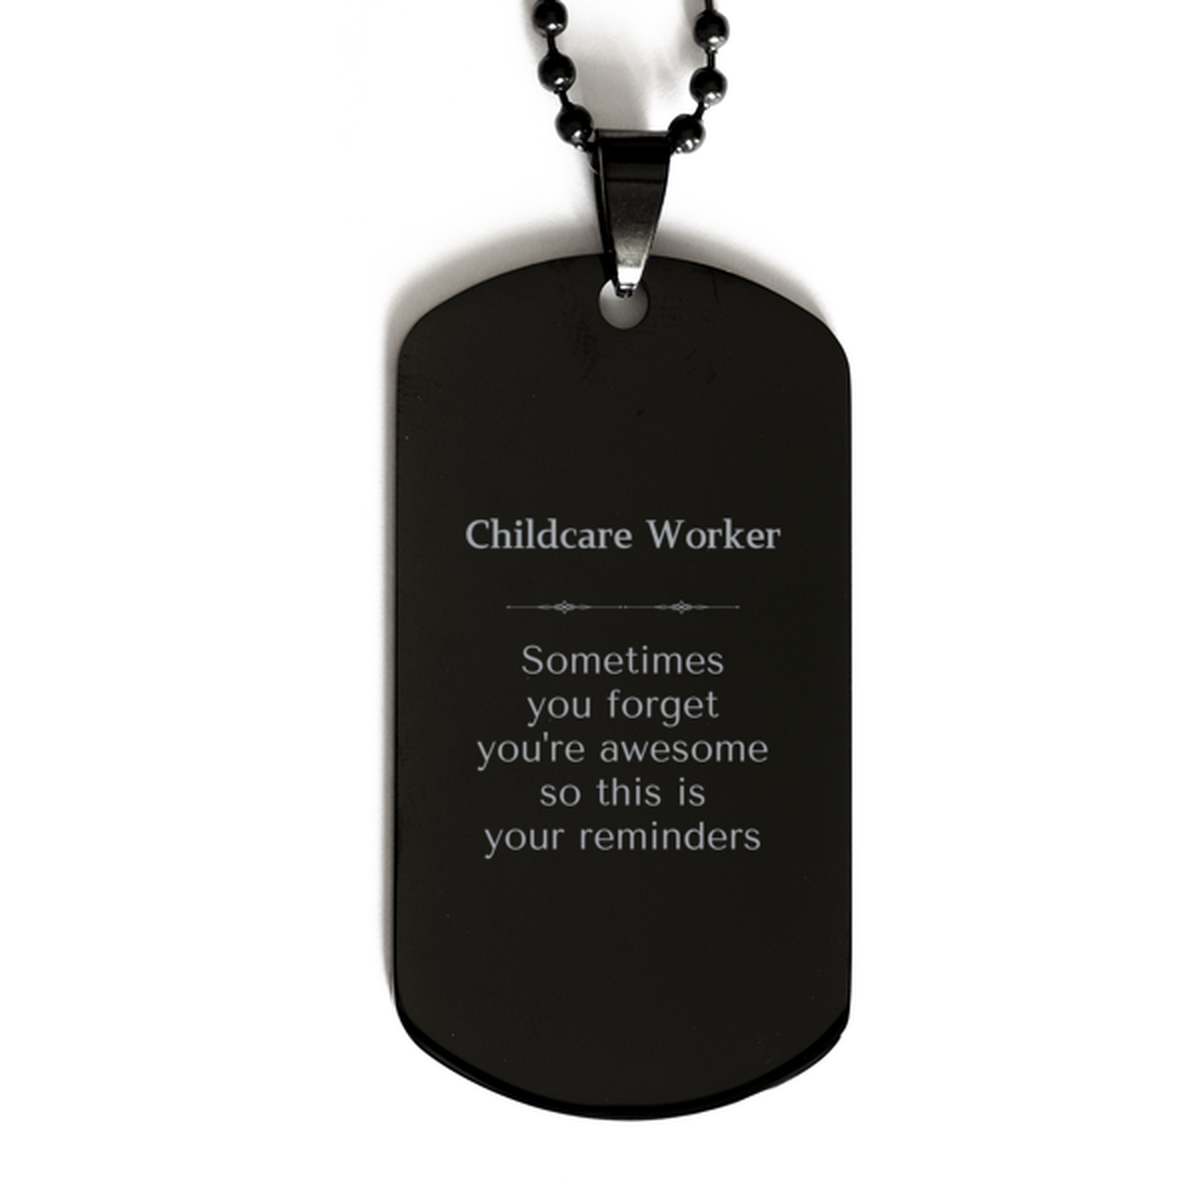 Sentimental Childcare Worker Black Dog Tag, Childcare Worker Sometimes you forget you're awesome so this is your reminders, Graduation Christmas Birthday Gifts for Childcare Worker, Men, Women, Coworkers